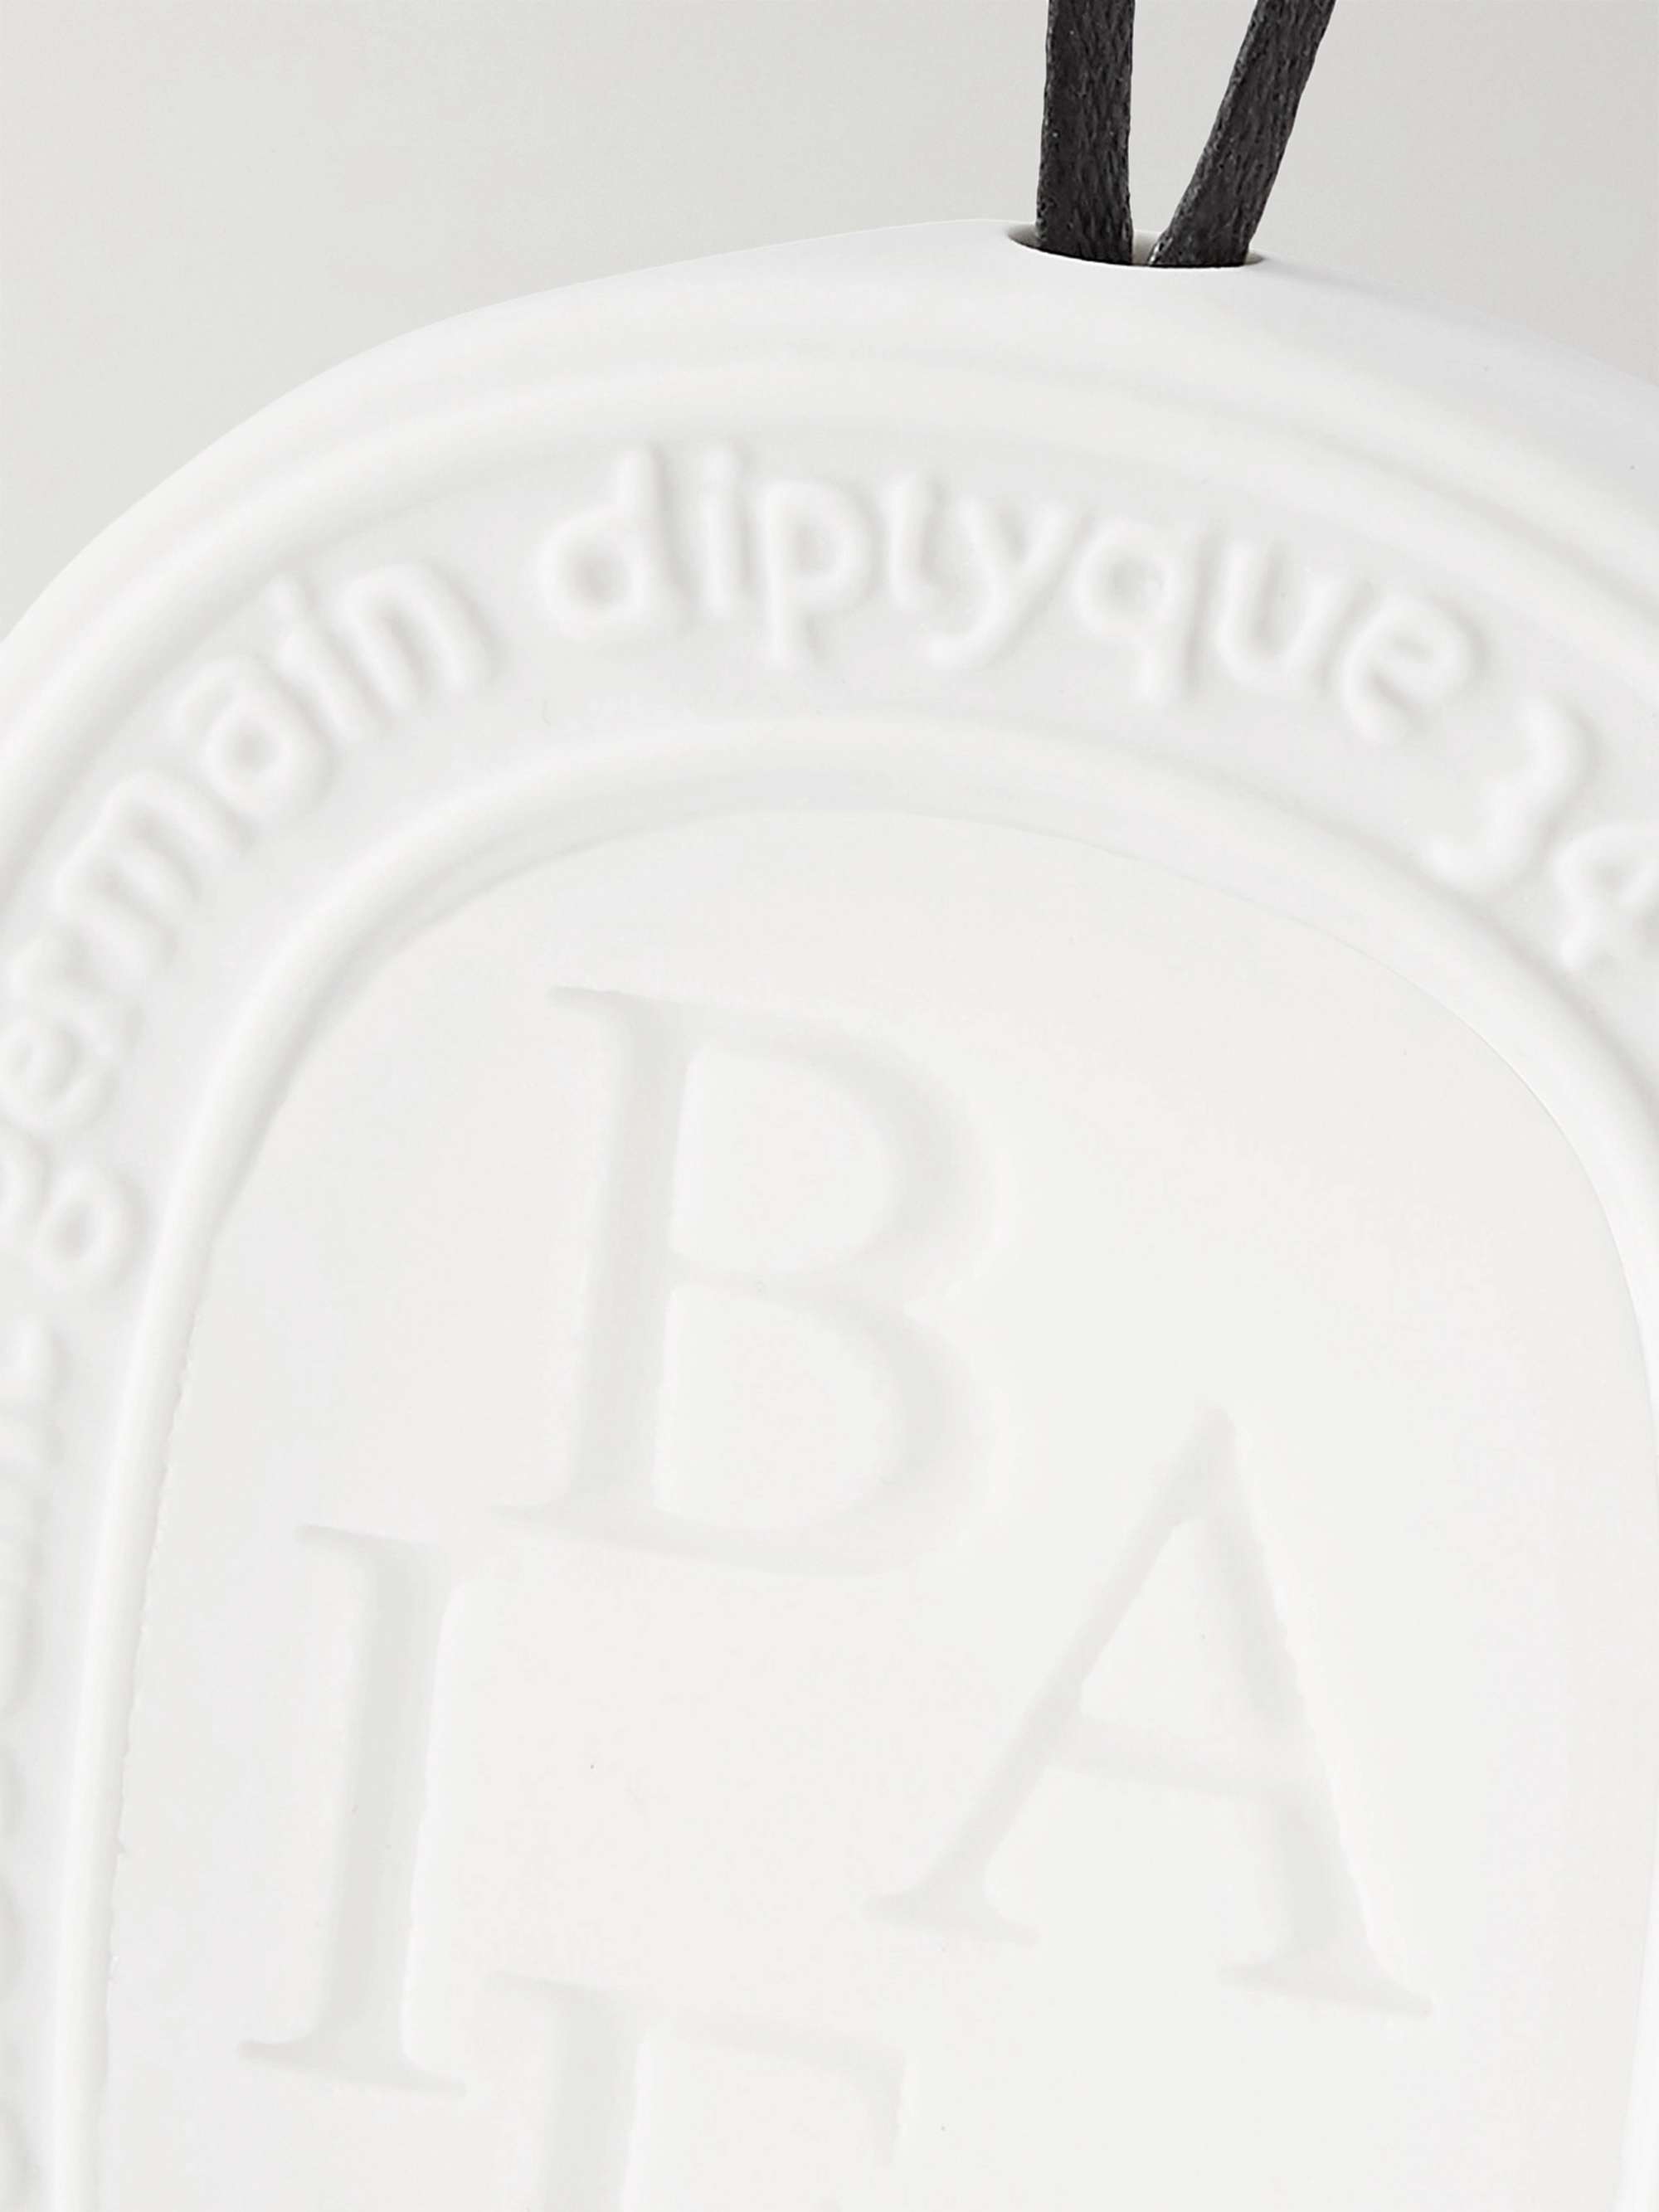 DIPTYQUE Baies Scented Oval, 35g